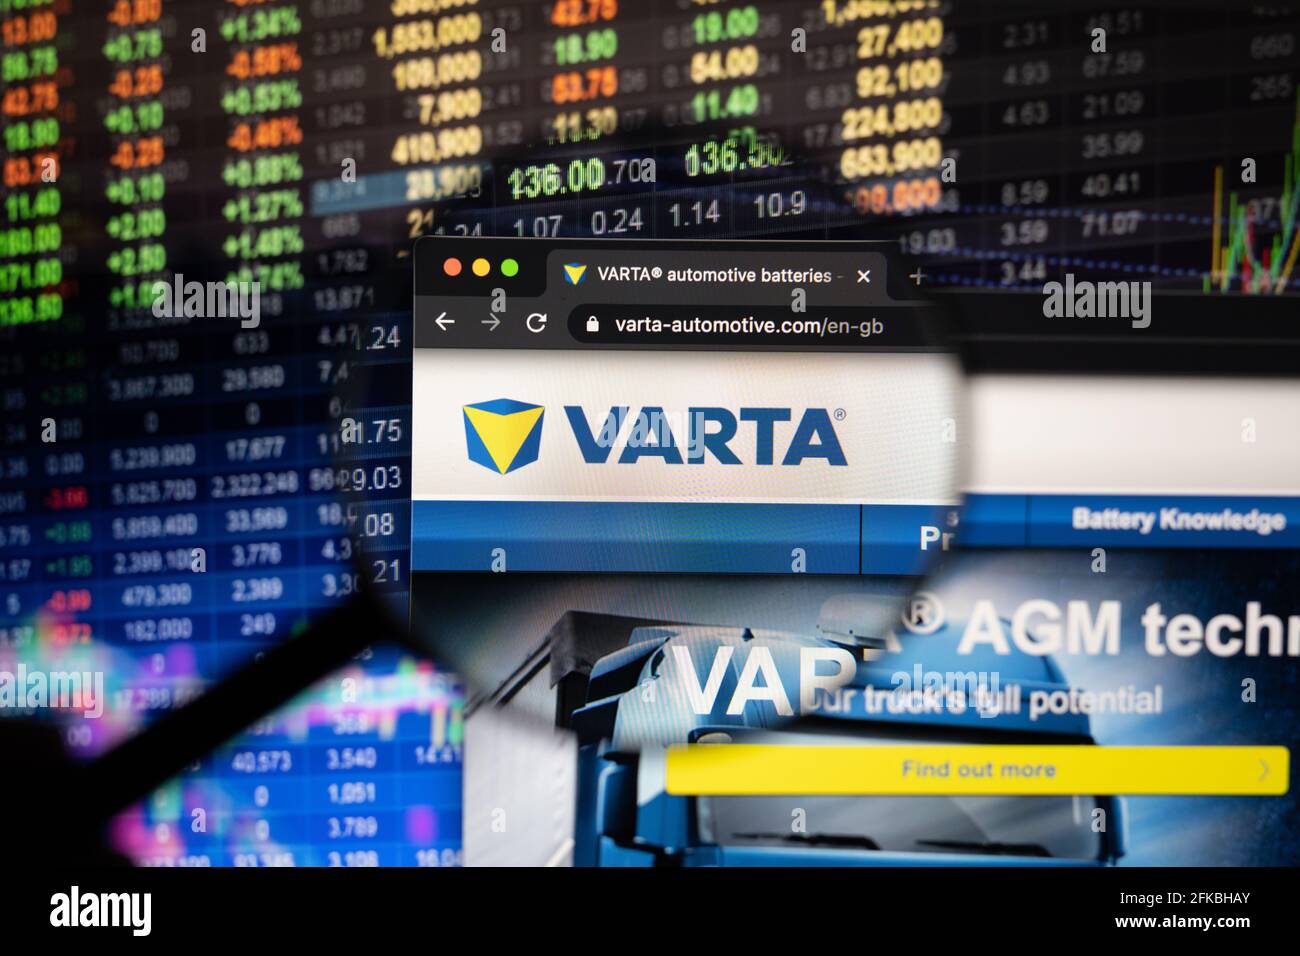 Varta company logo on a website with blurry stock market developments the background, seen on a screen through a magnifying glass Stock Photo